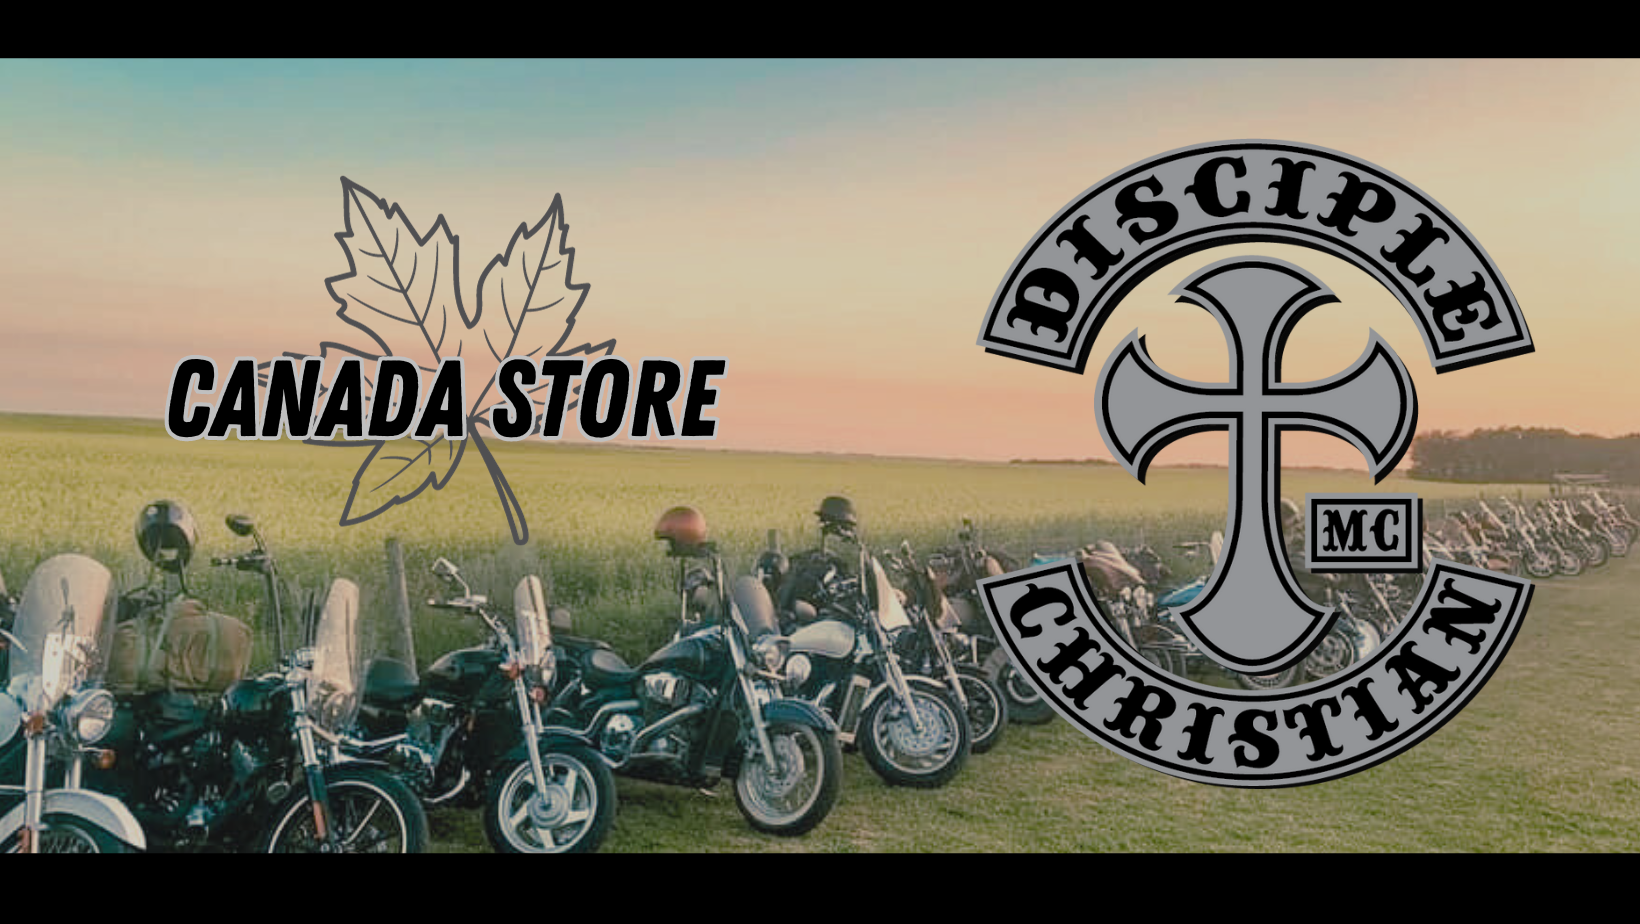 Disciple Christian Motorcycle Club Canada Merchandise Store